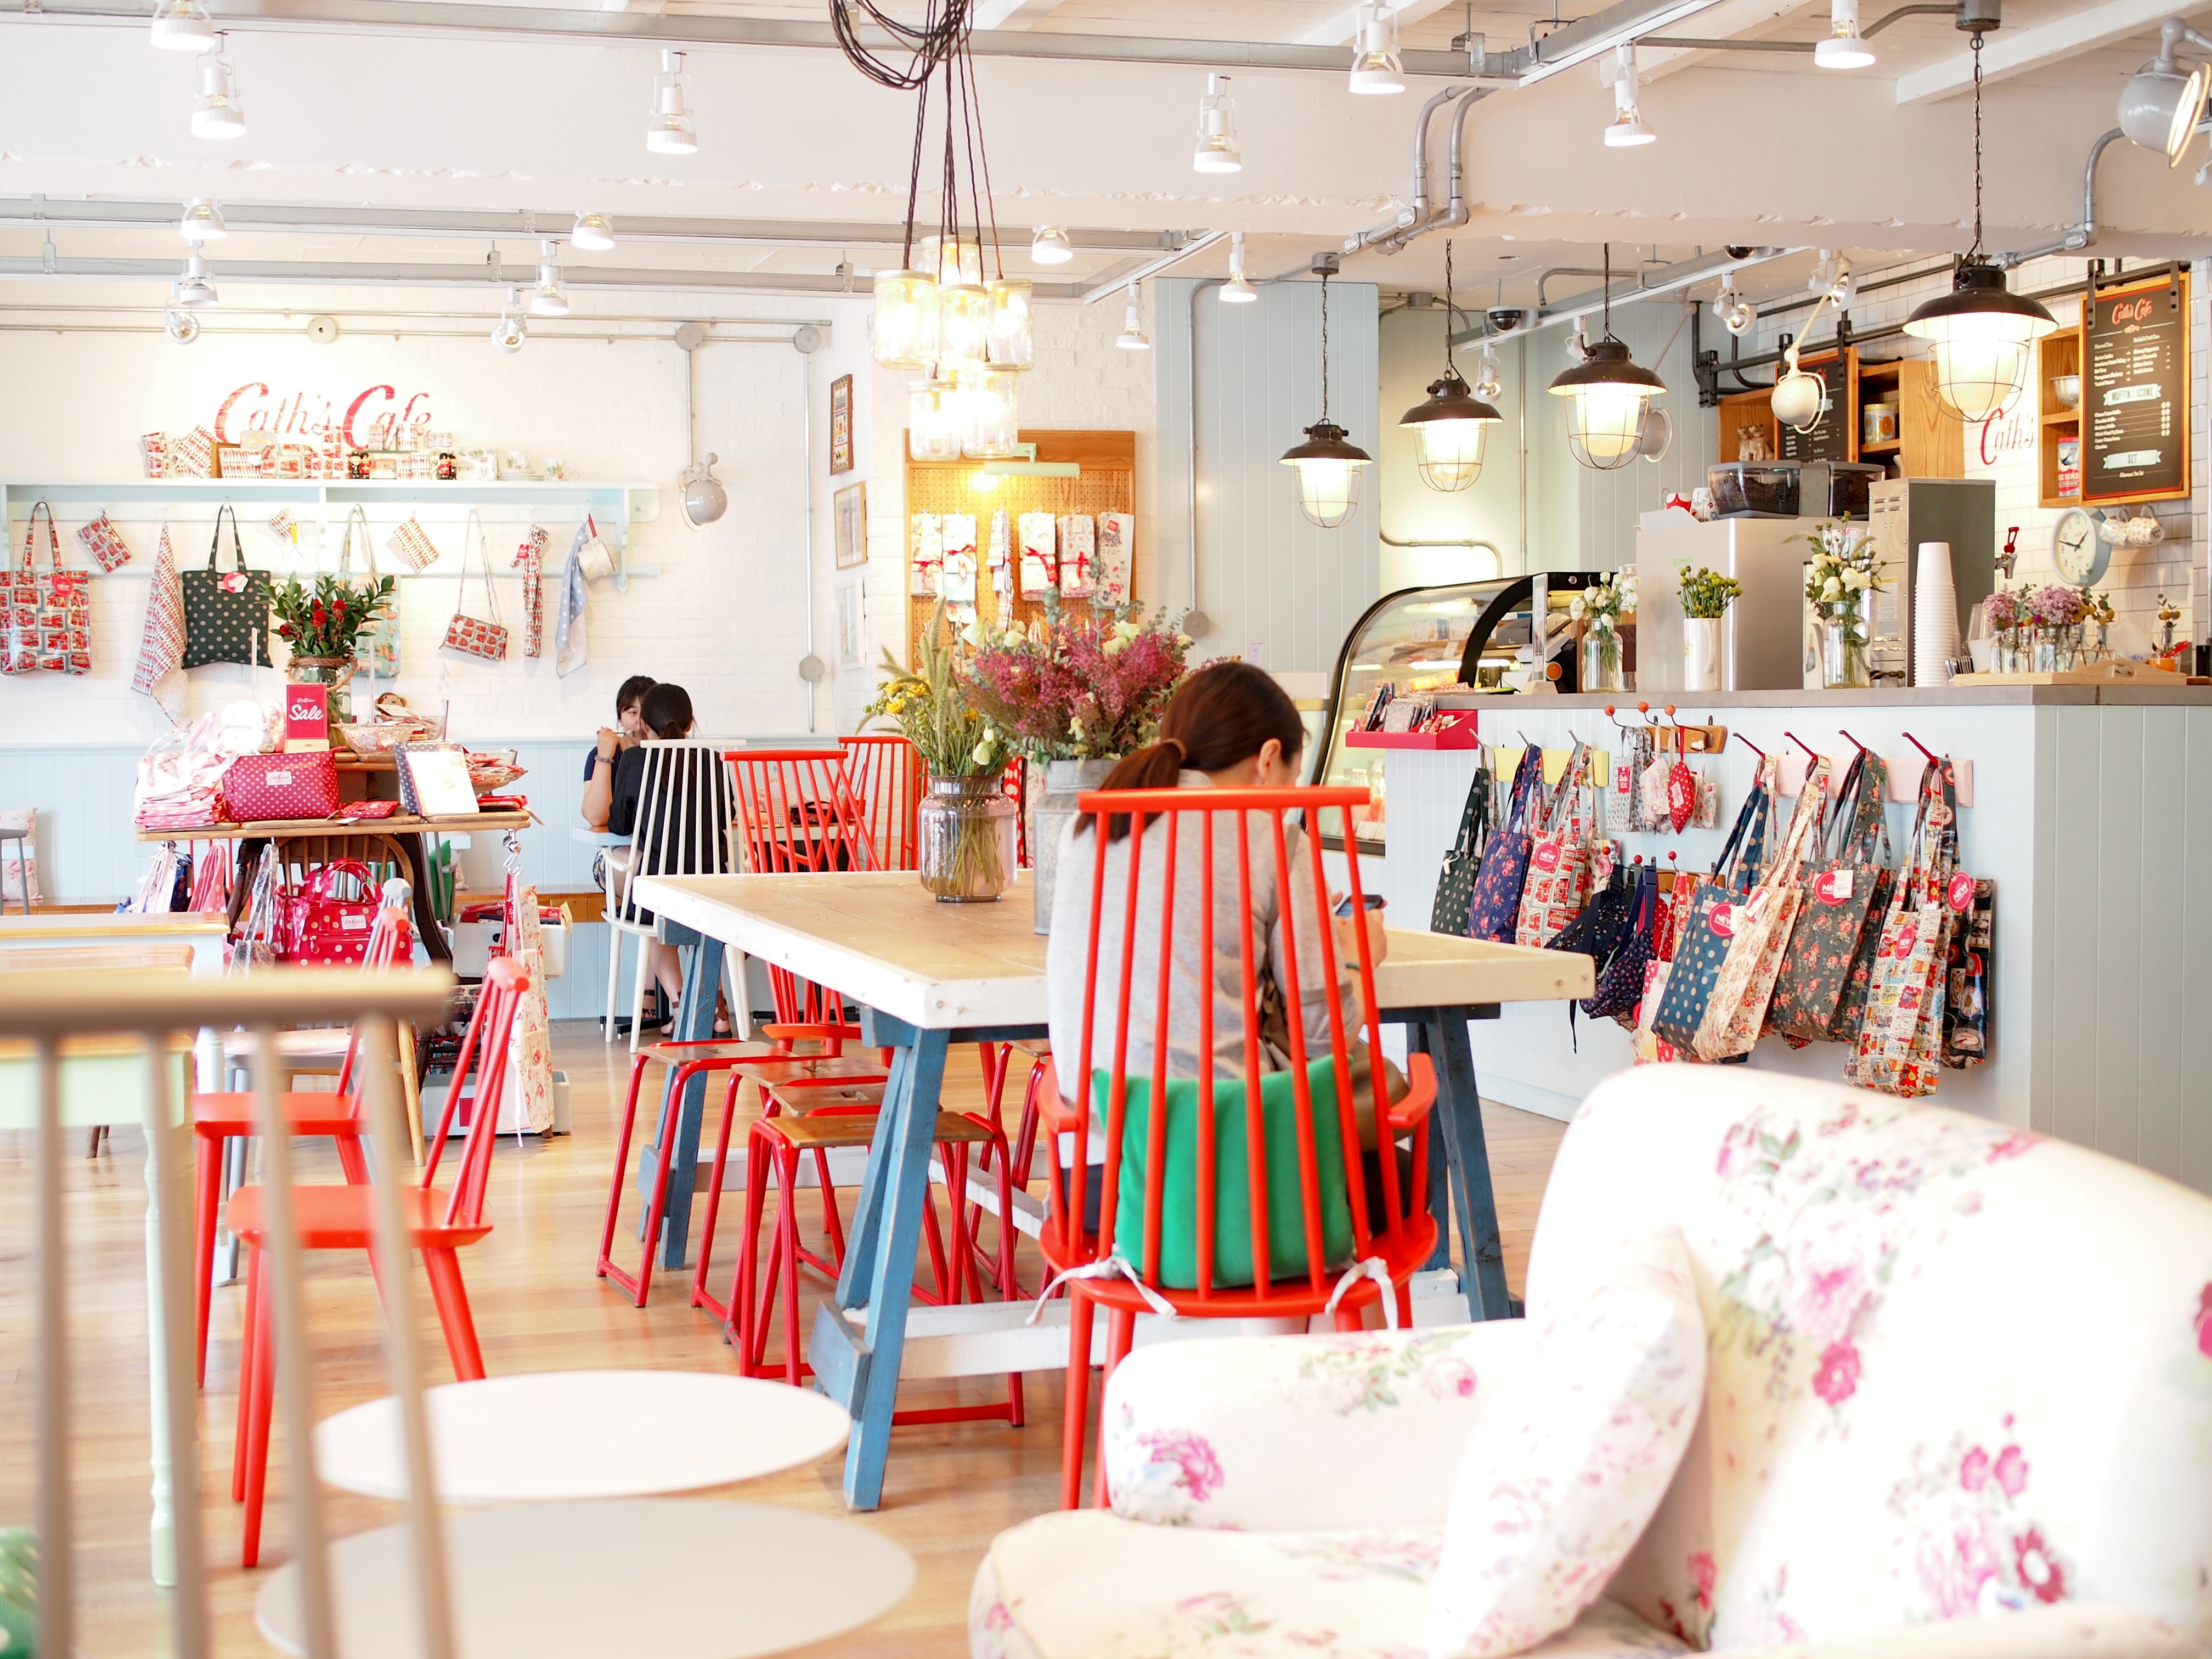 cath kidston cafe – Fat couple travels 